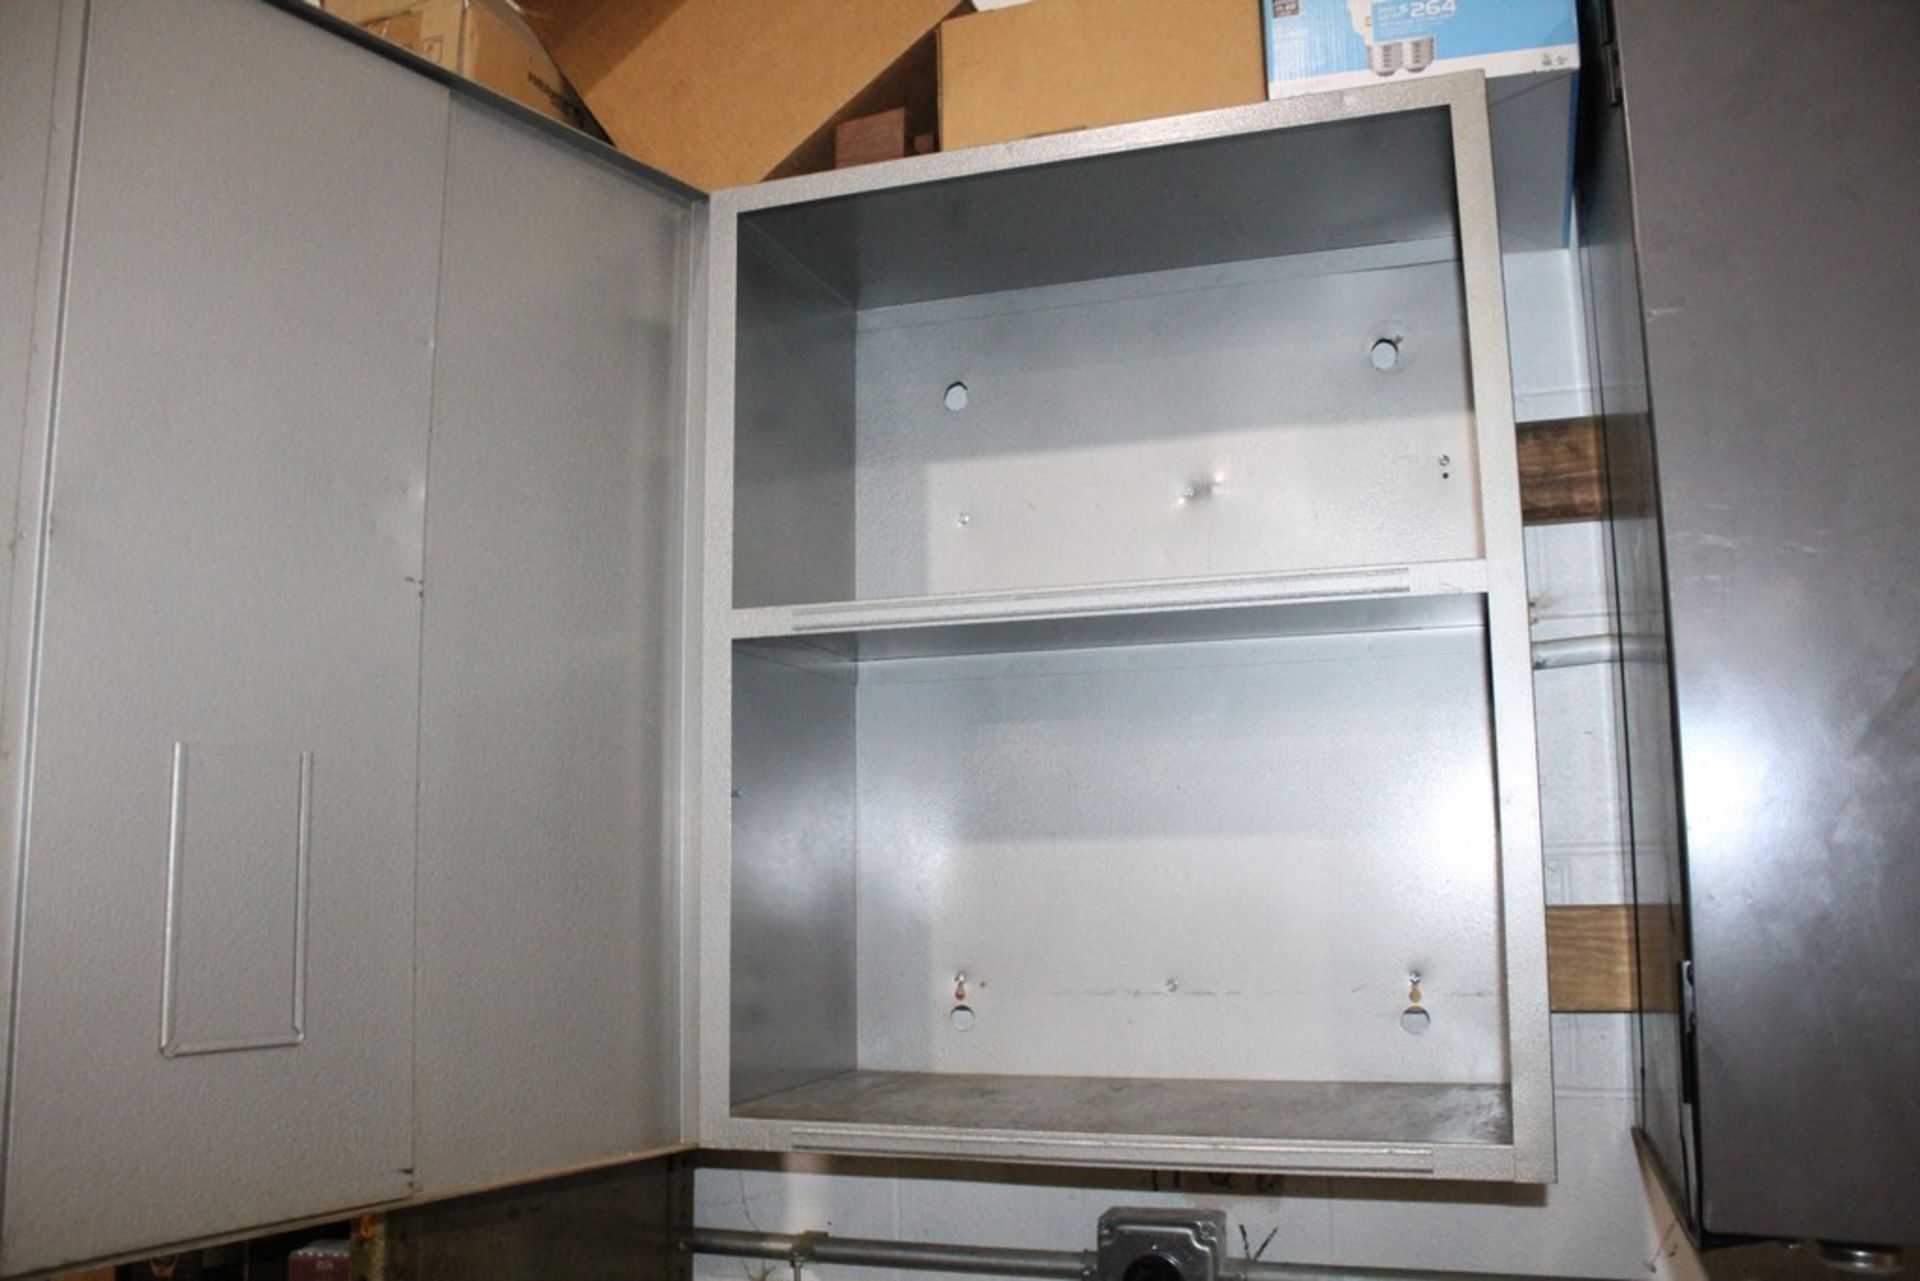 MCGRAW BUSS FUSE CABINET WITH KEY 25" X 12" X 30" LOADING FEE: $35.00 INCLUDES INCLUDES REMOVAL FROM - Image 2 of 2